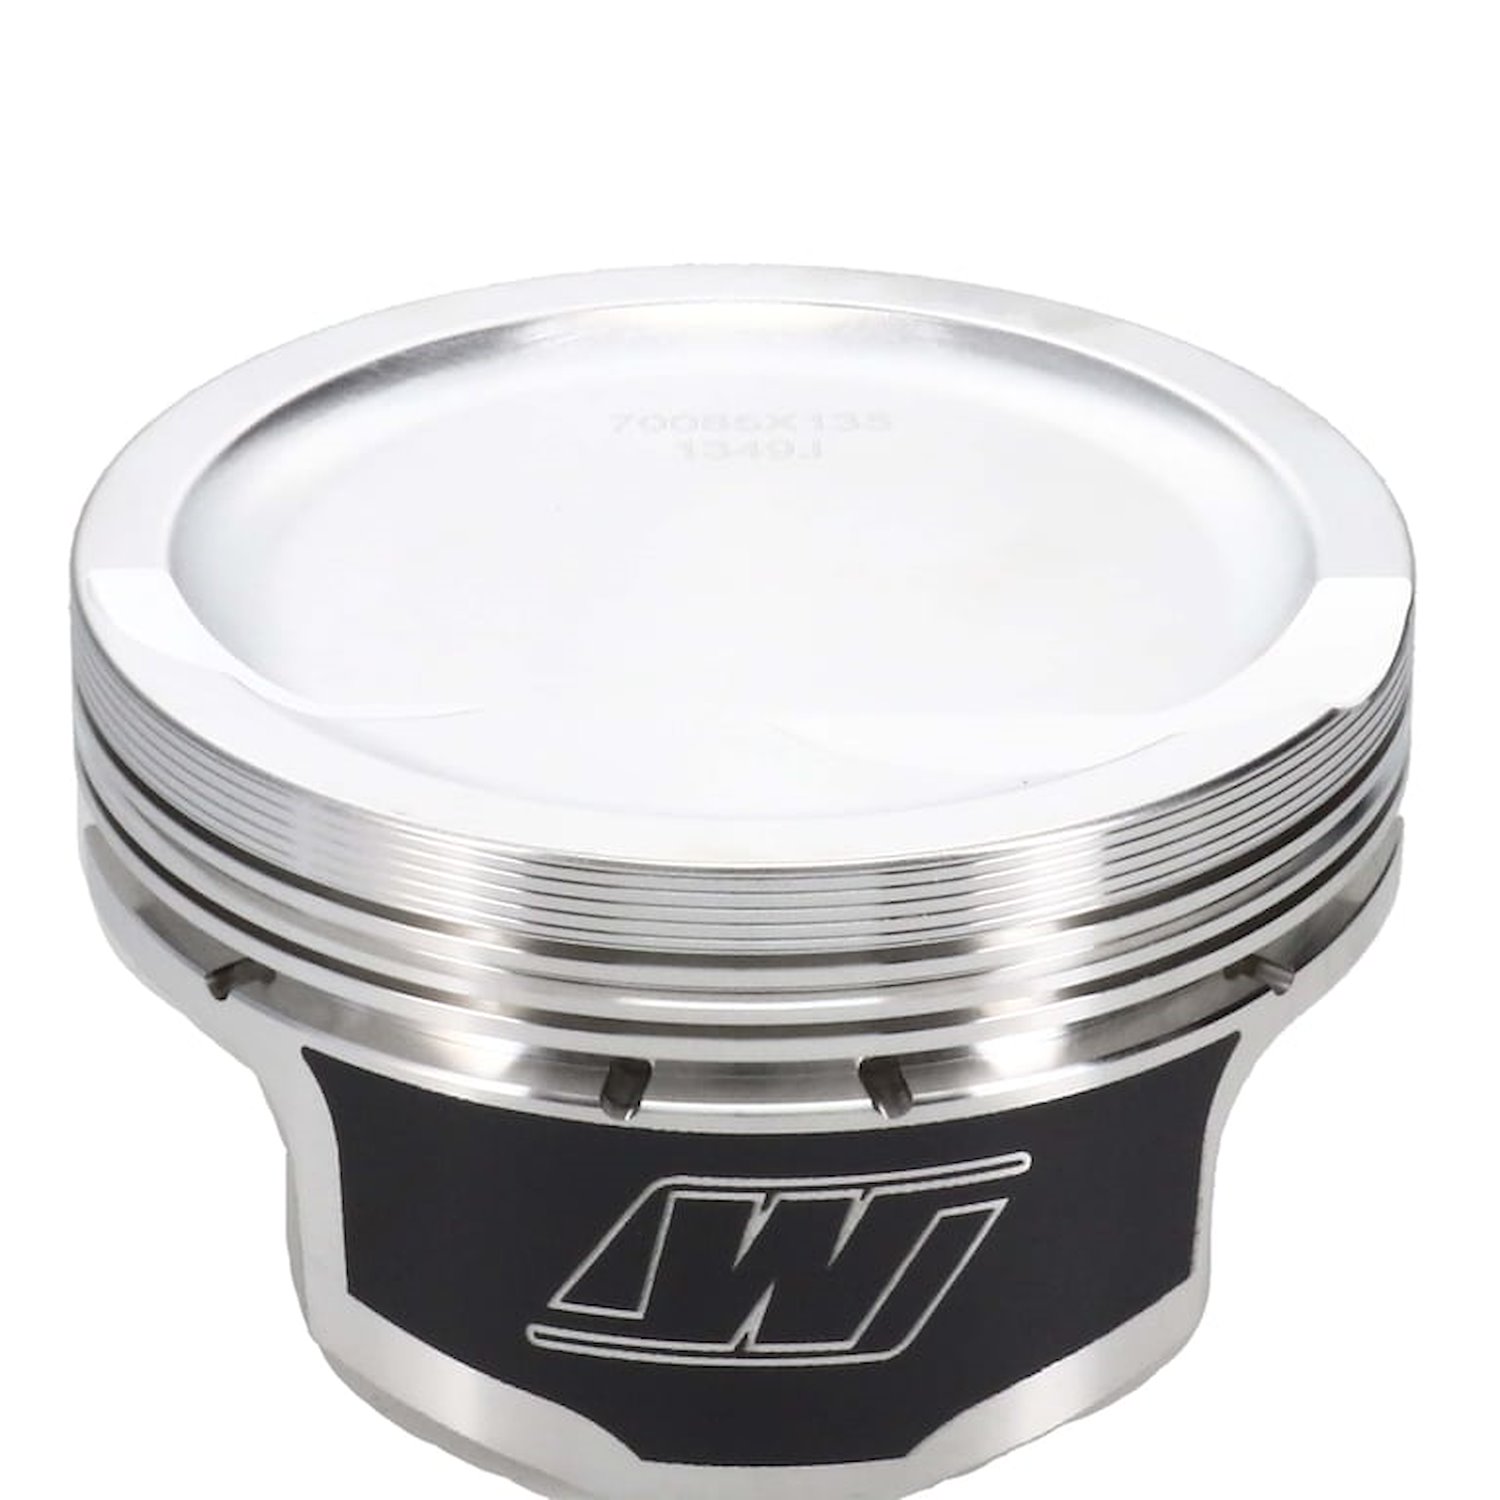 RED0085X125 RED-Series Piston Set, Chevy LS, 4.125 in. Bore, -20 cc Dish